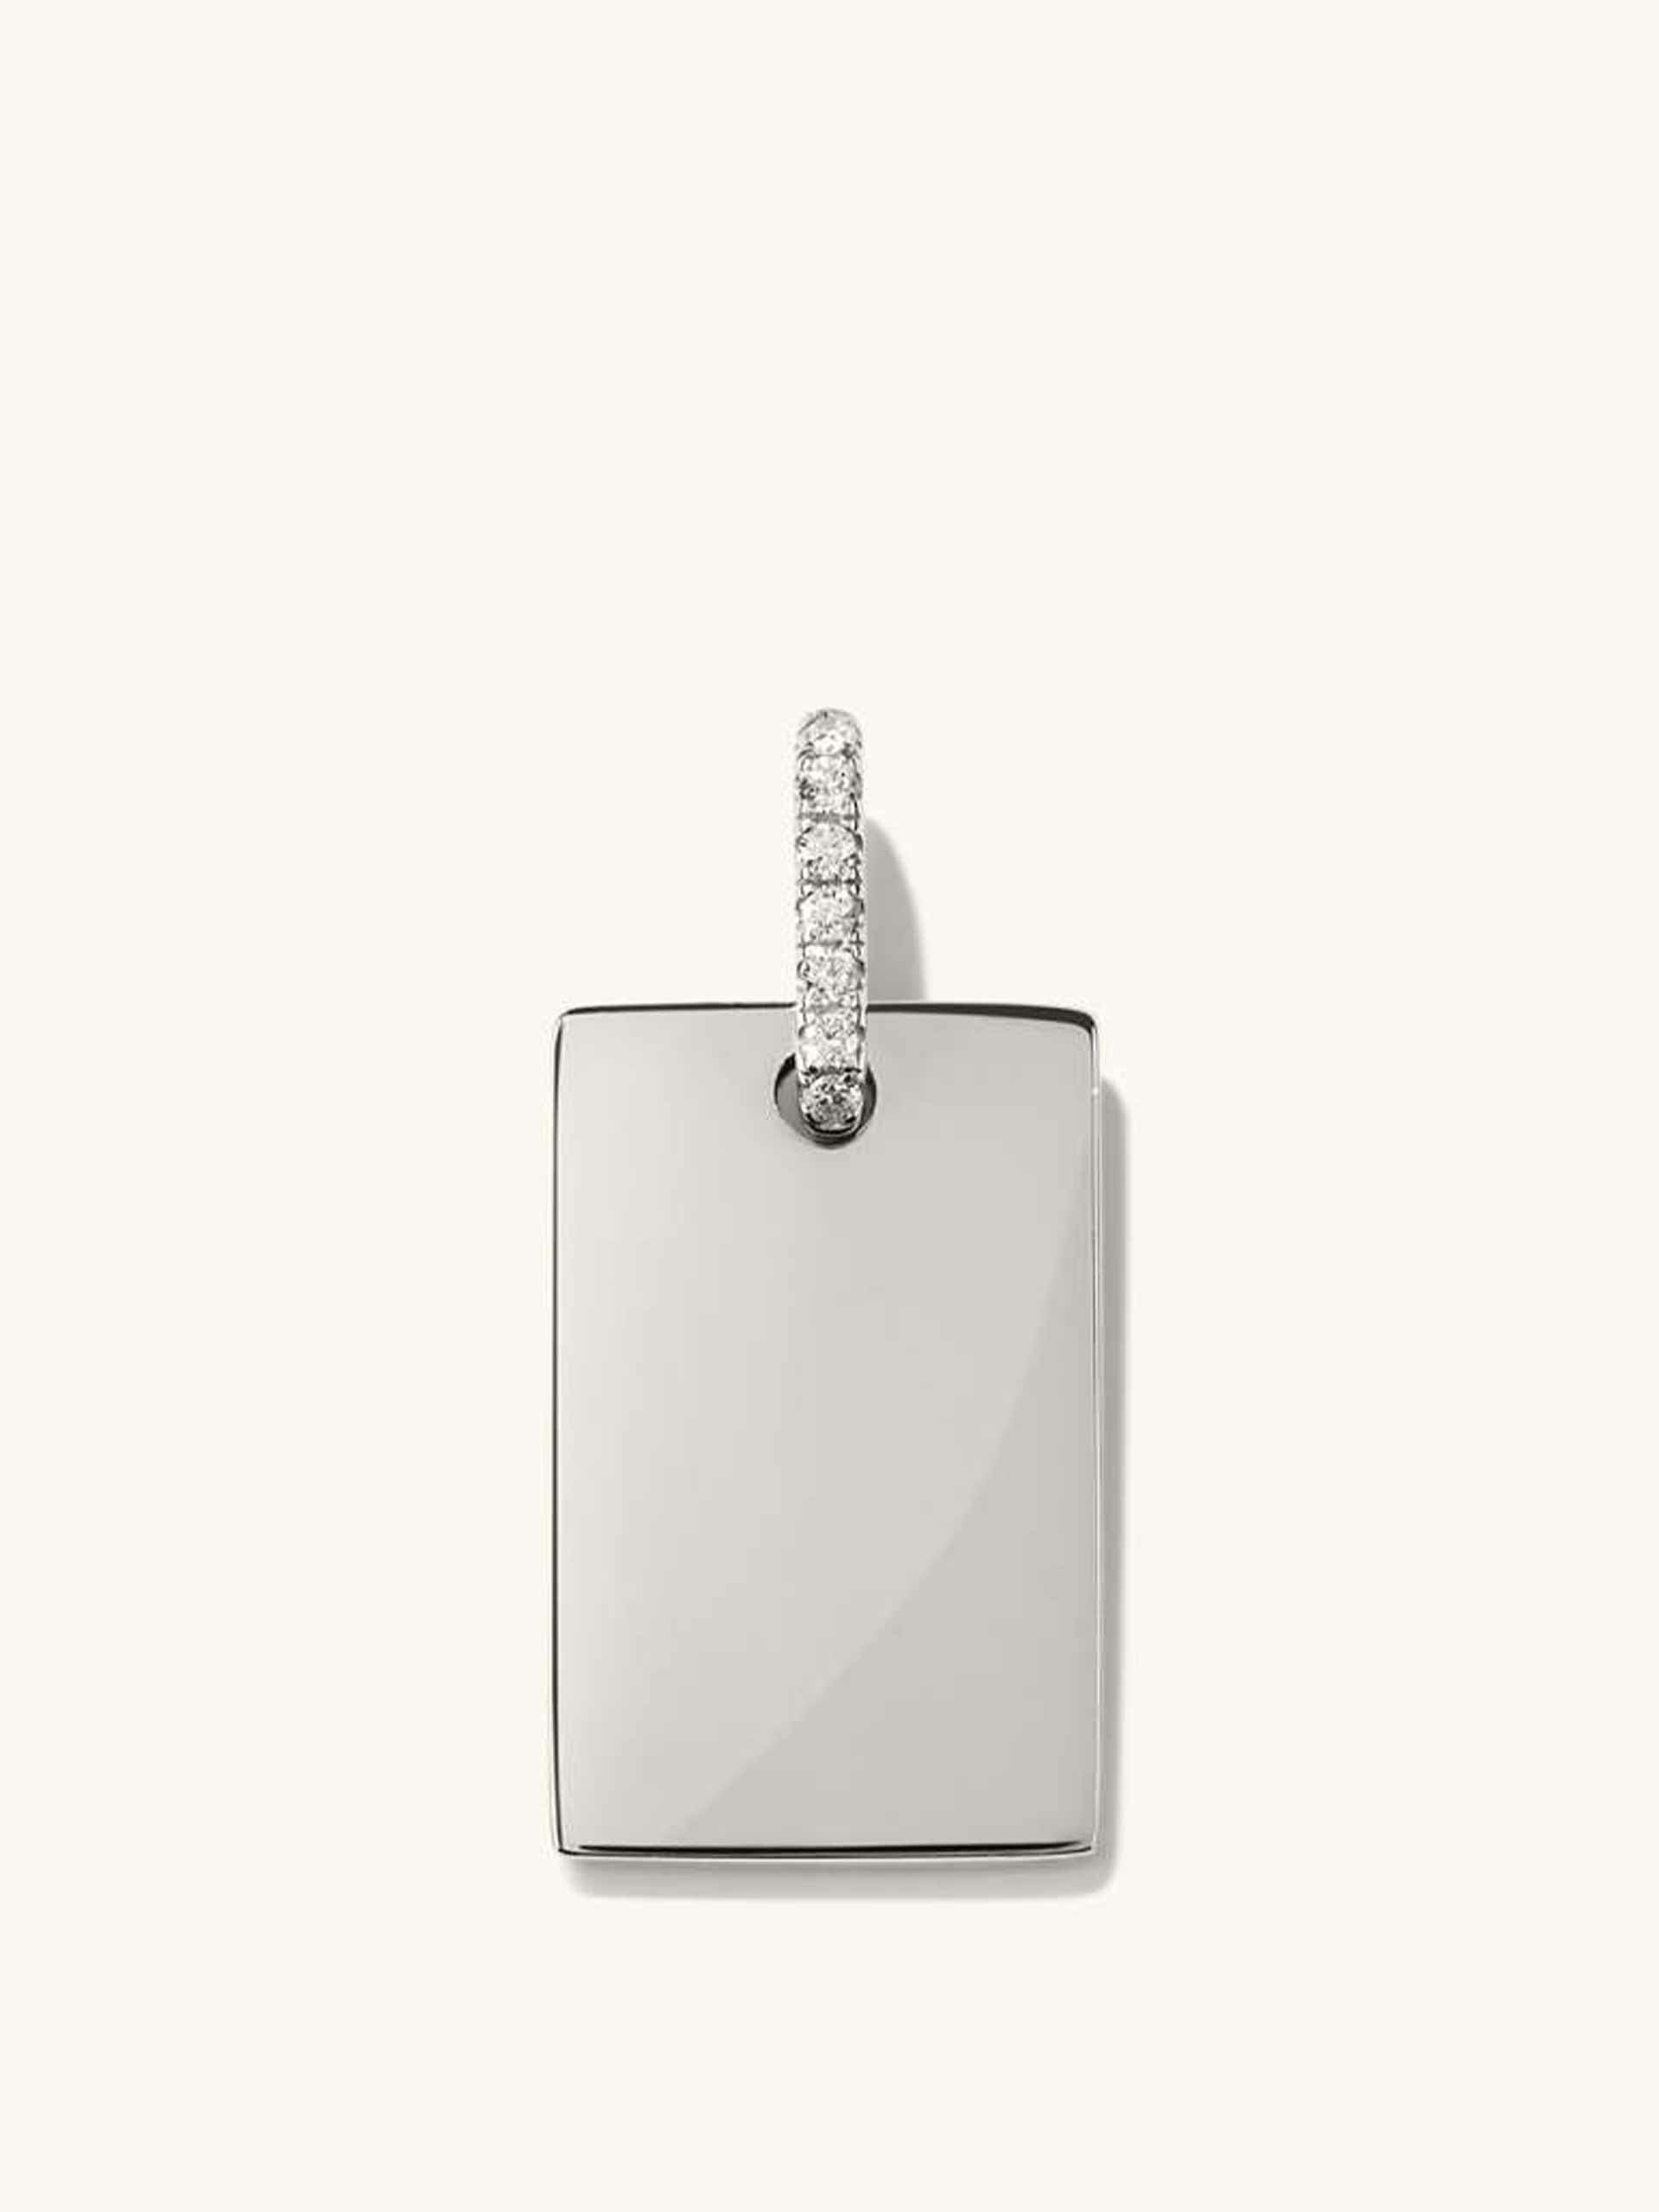 14kt white gold and diamond tag pendant